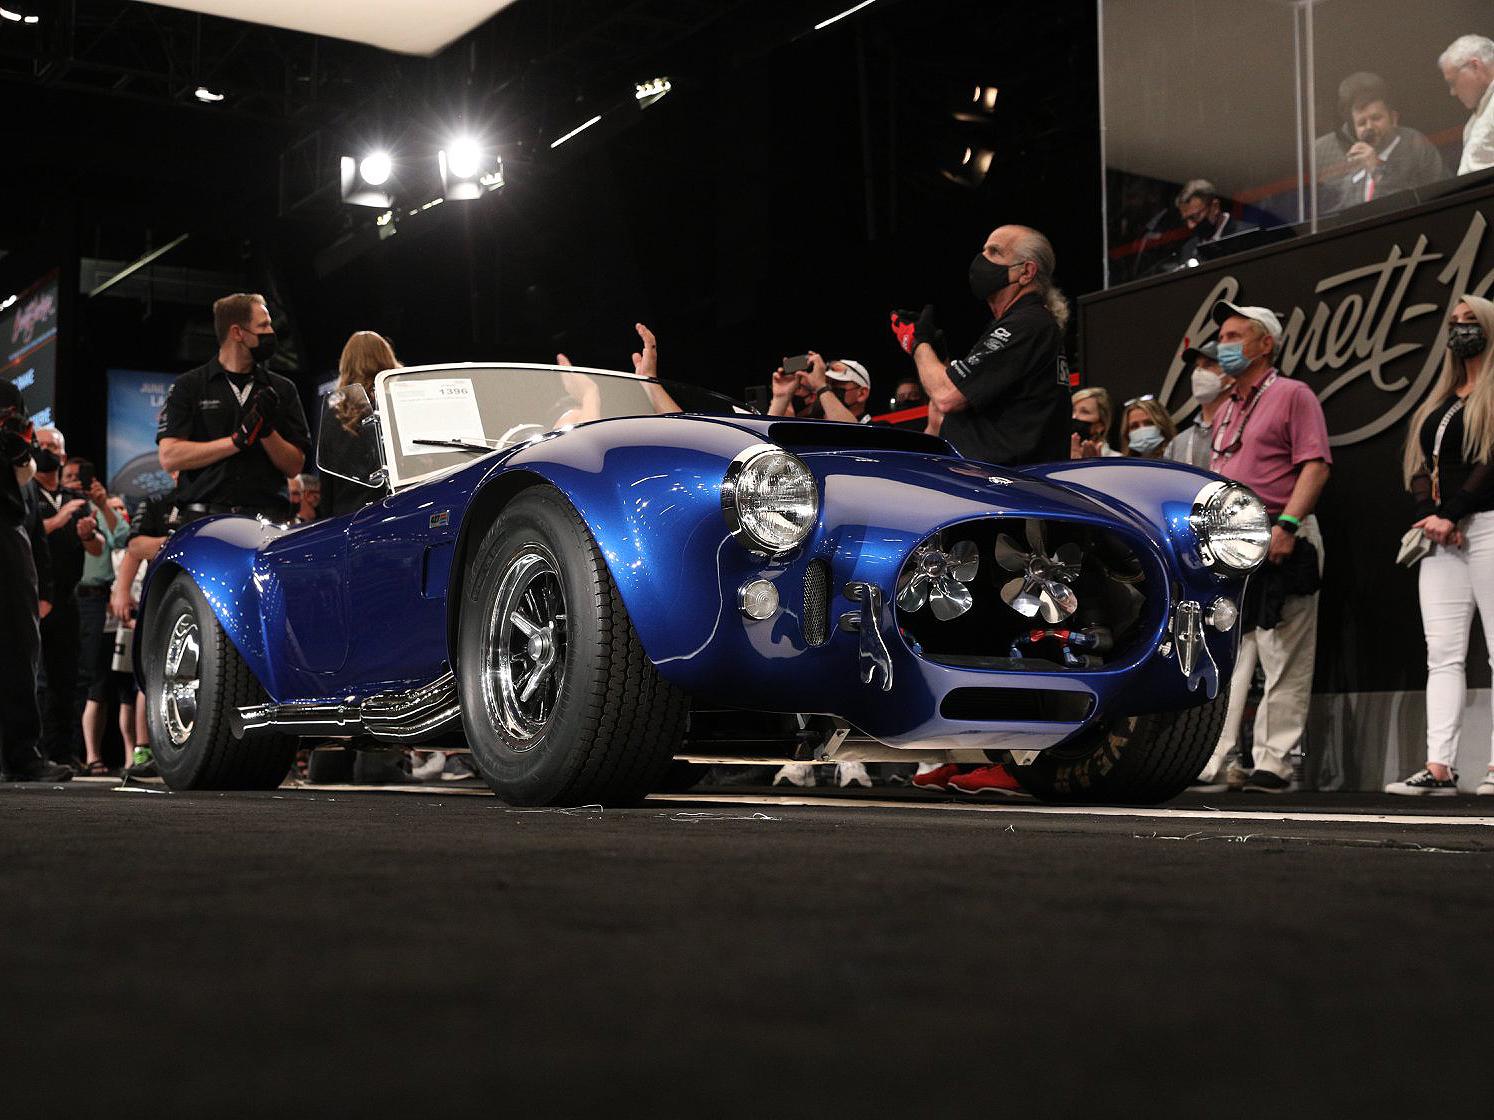 Carroll Shelby's personal 1966 Shelby Cobra 427 Super Snake sold at auction over the weekend.